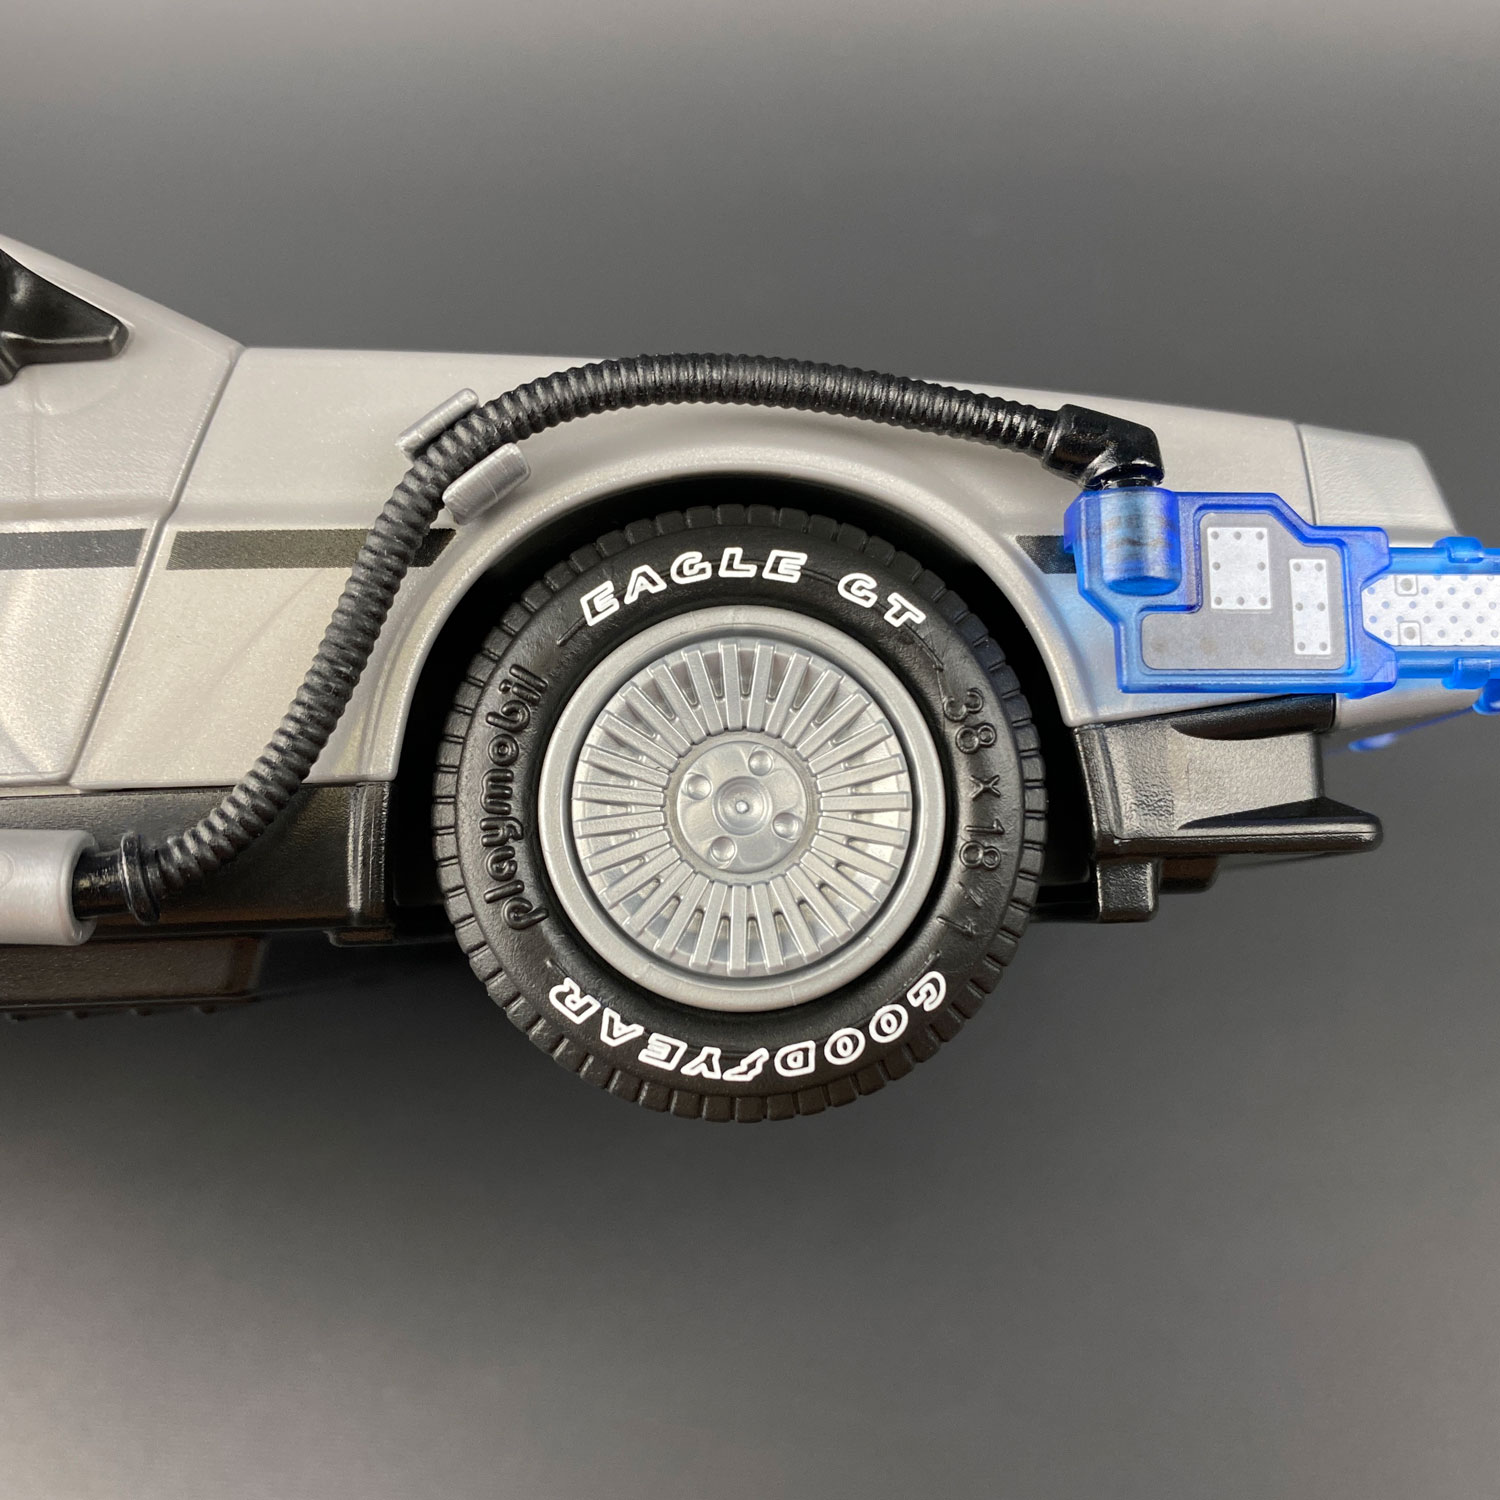 Playmobil DeLorean wheel with Tyre Transfers mod installed